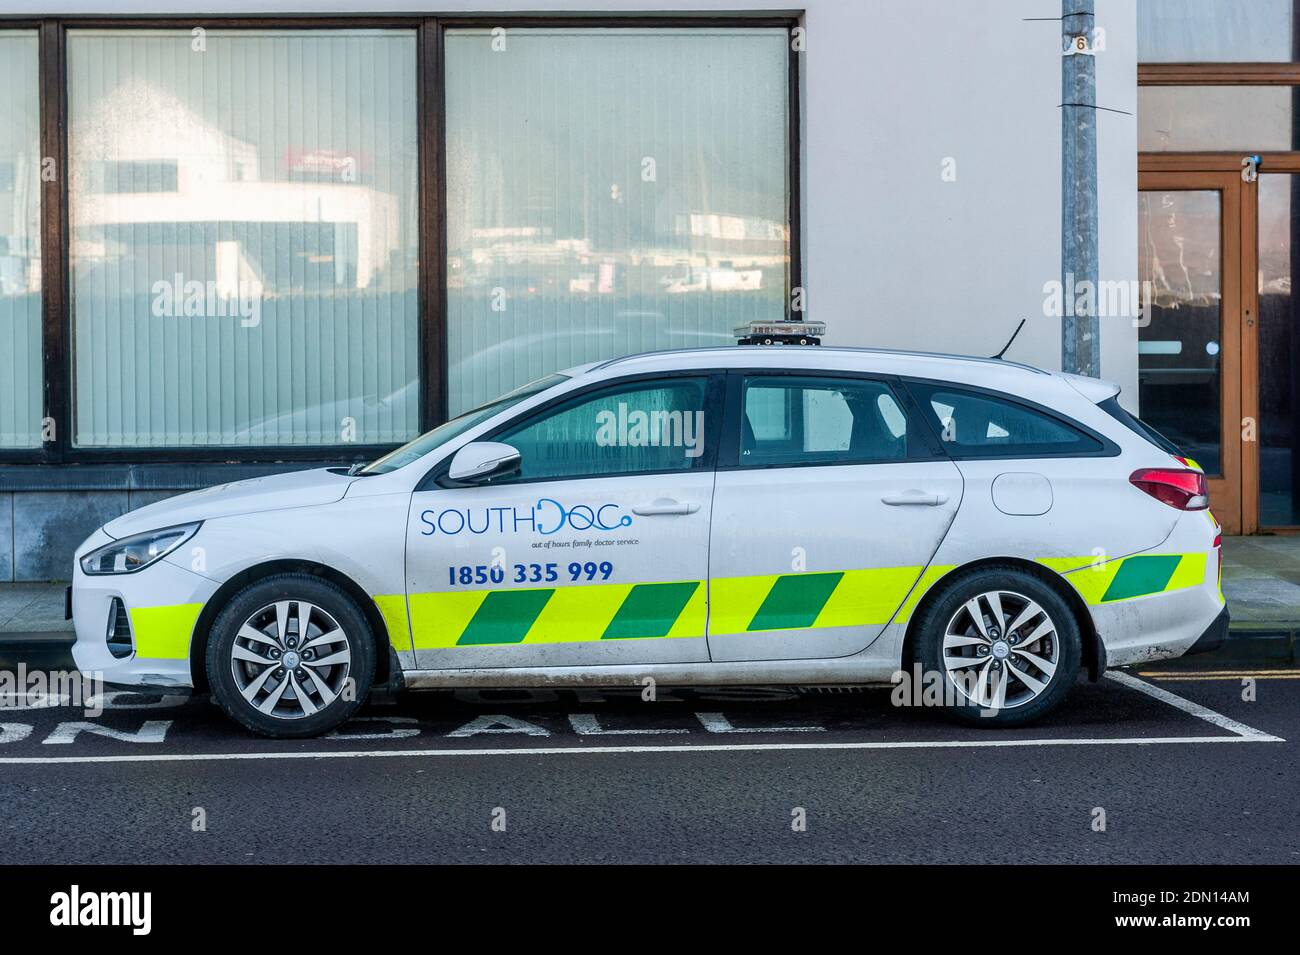 South Doc out of hours emergency vehicle in Ireland Stock Photo